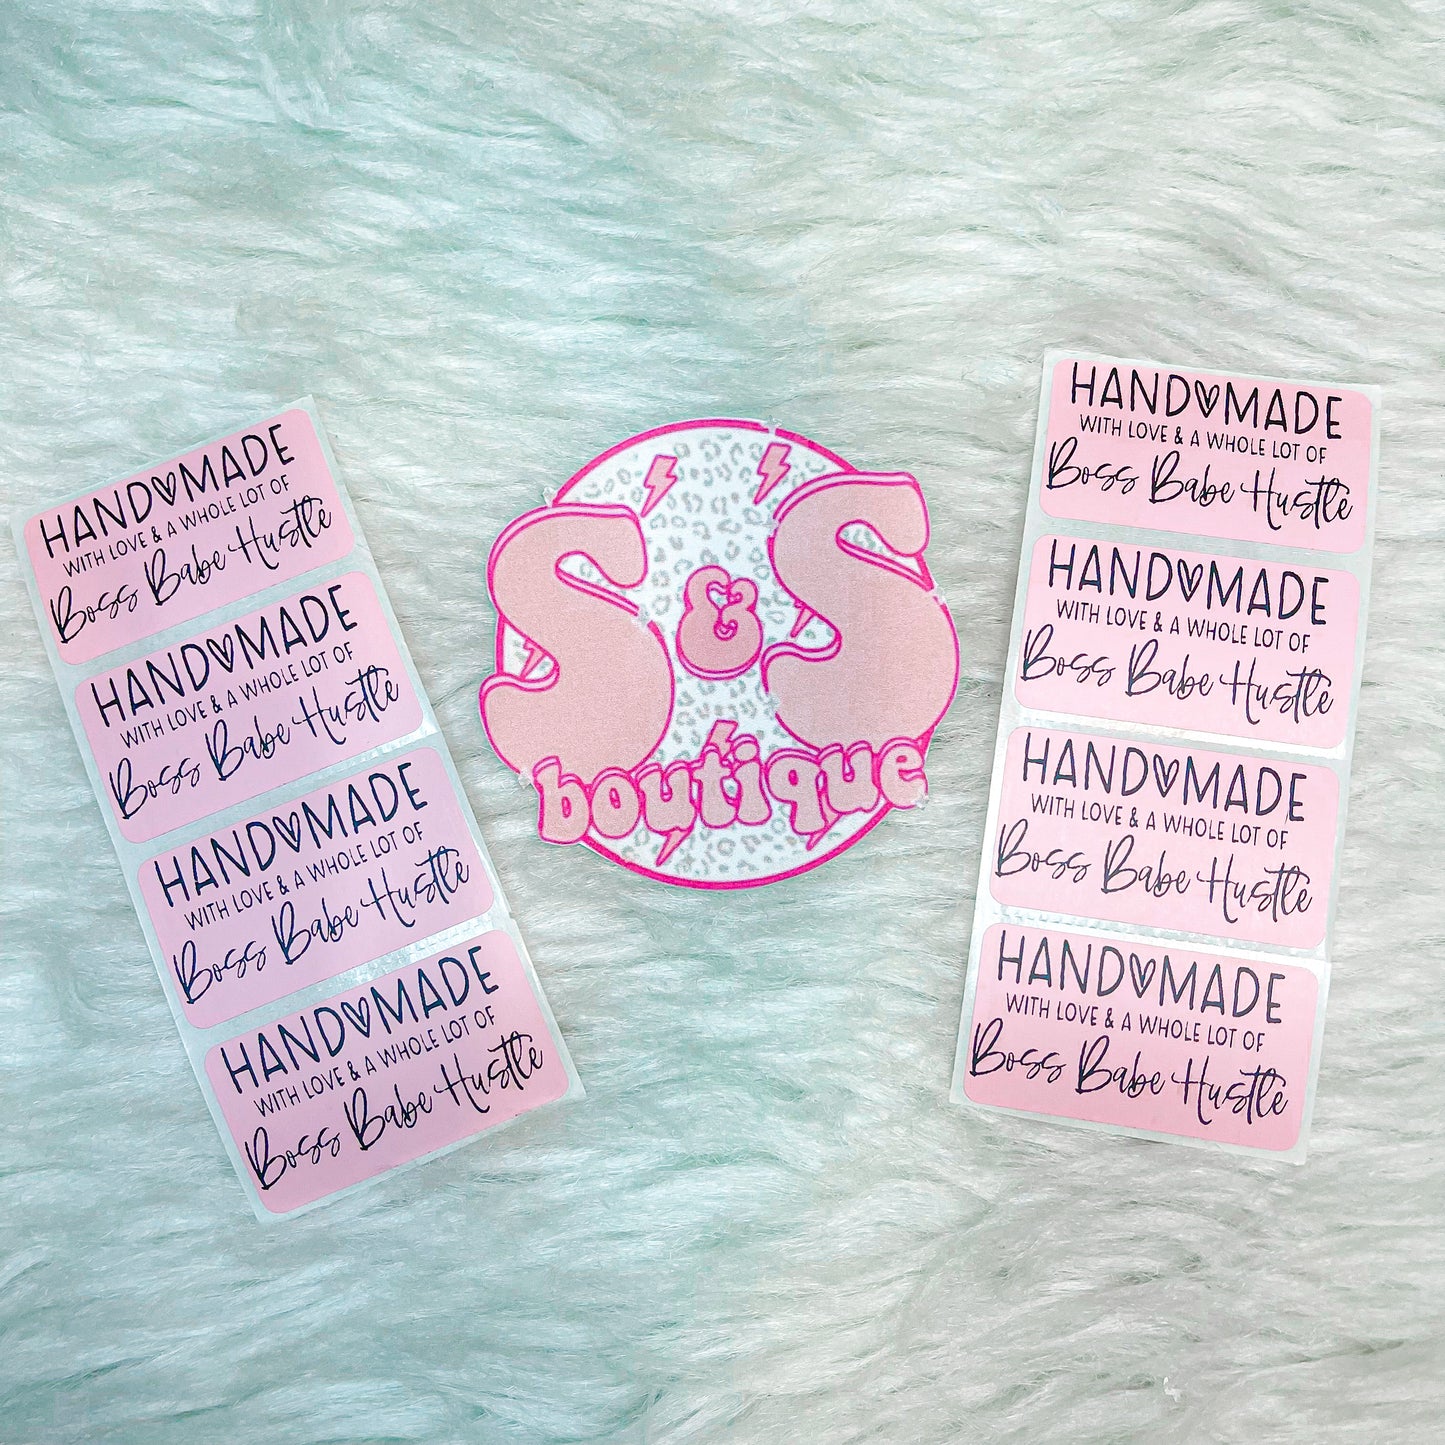 Handmade with love and boss babe Stickers